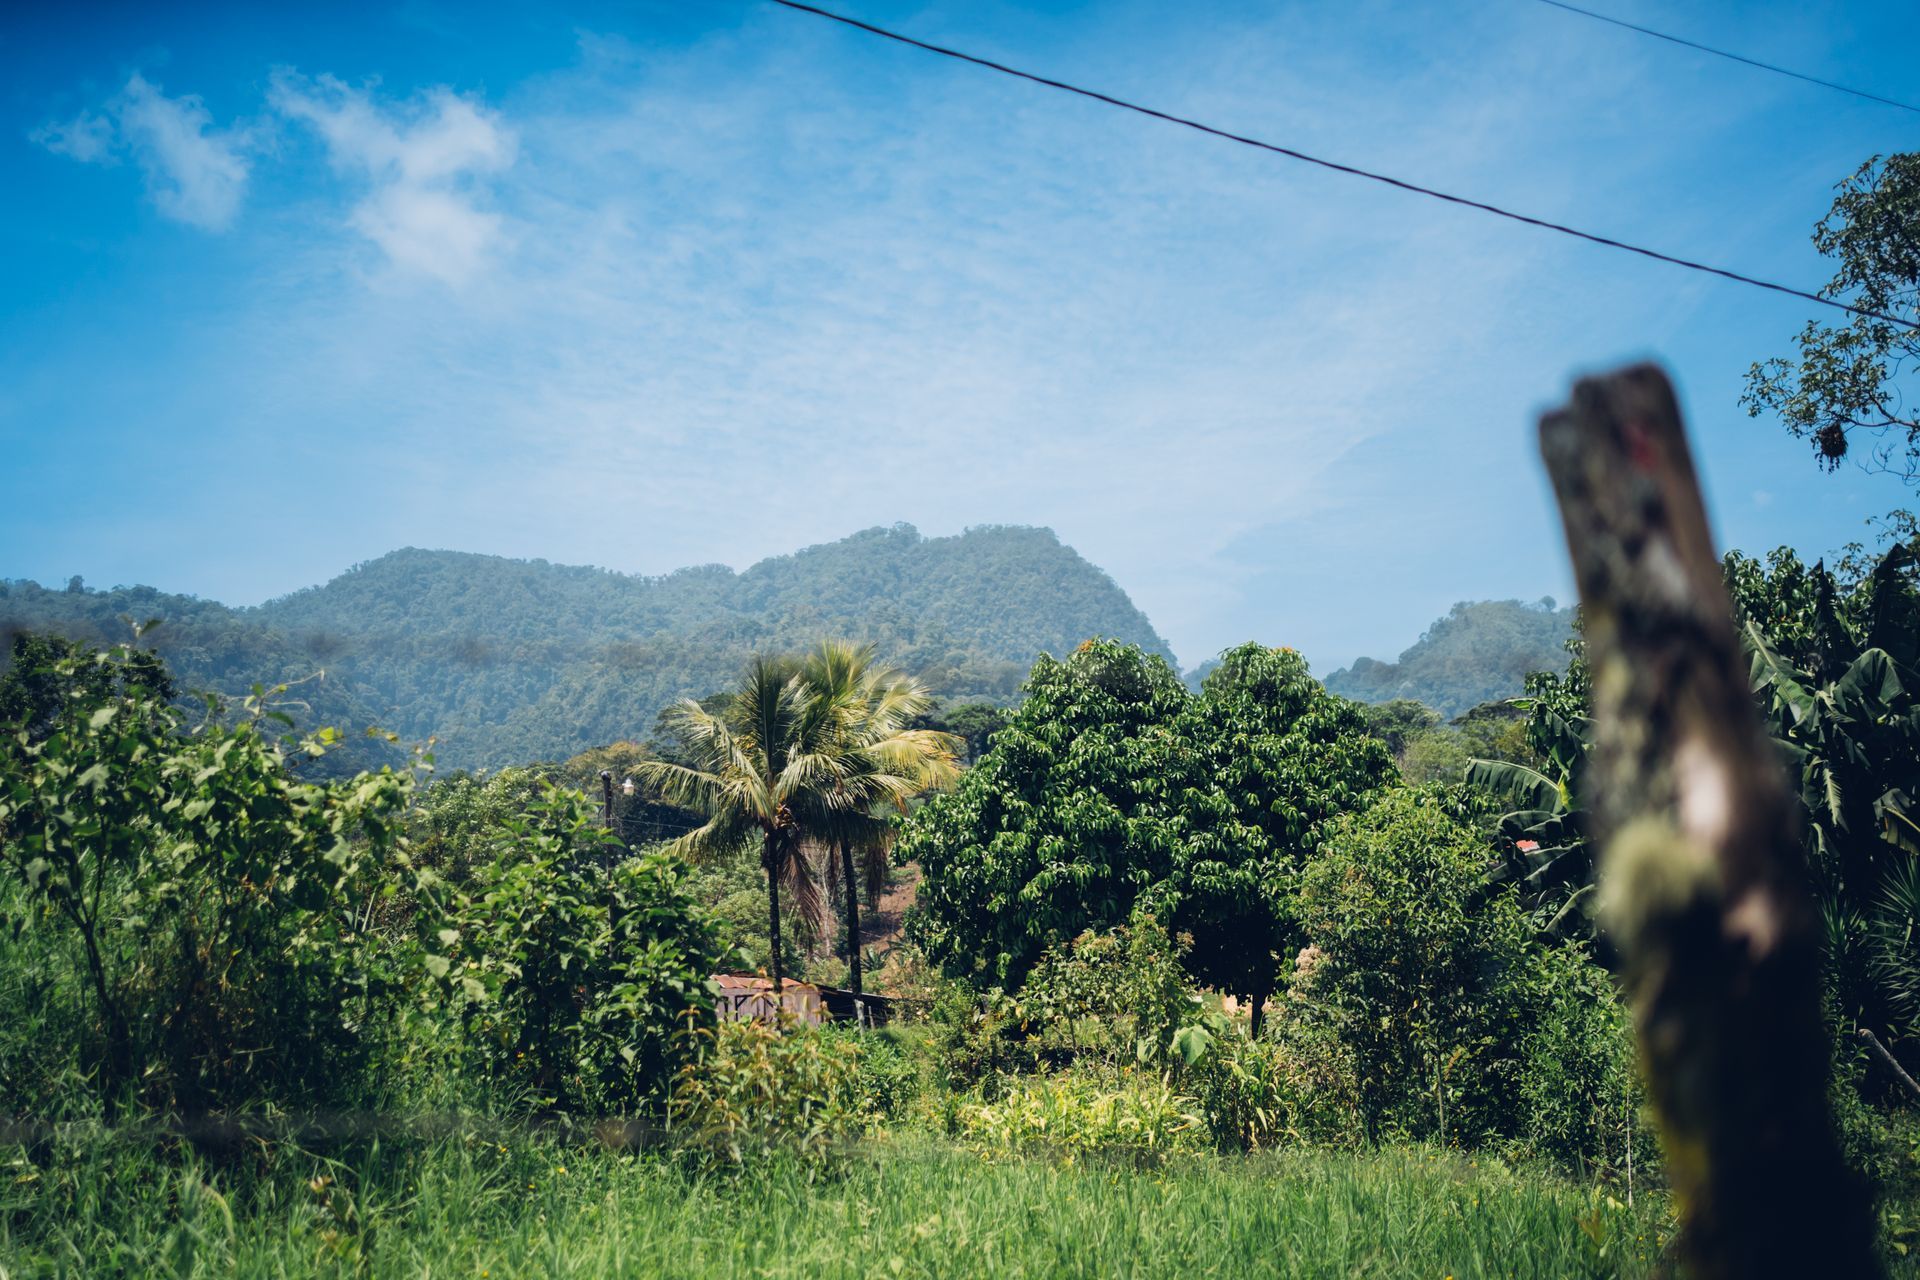 Honduran landscape with greenery in the foreground and mountains in the background.